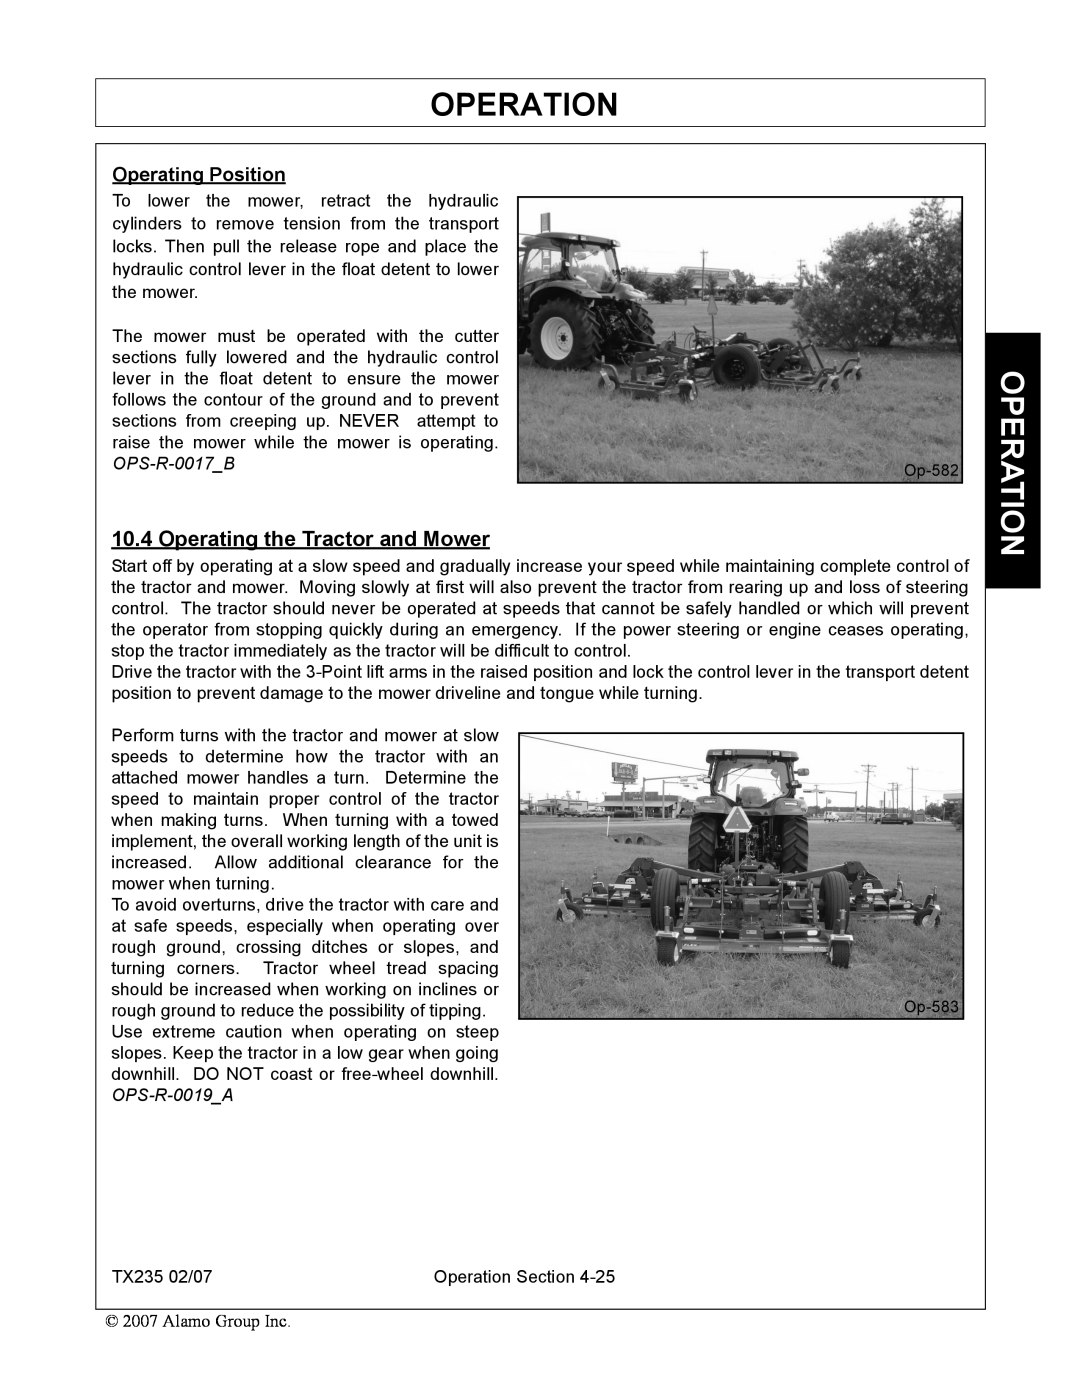 Alamo TX235 manual Operating the Tractor and Mower, Operation, Operating Position 